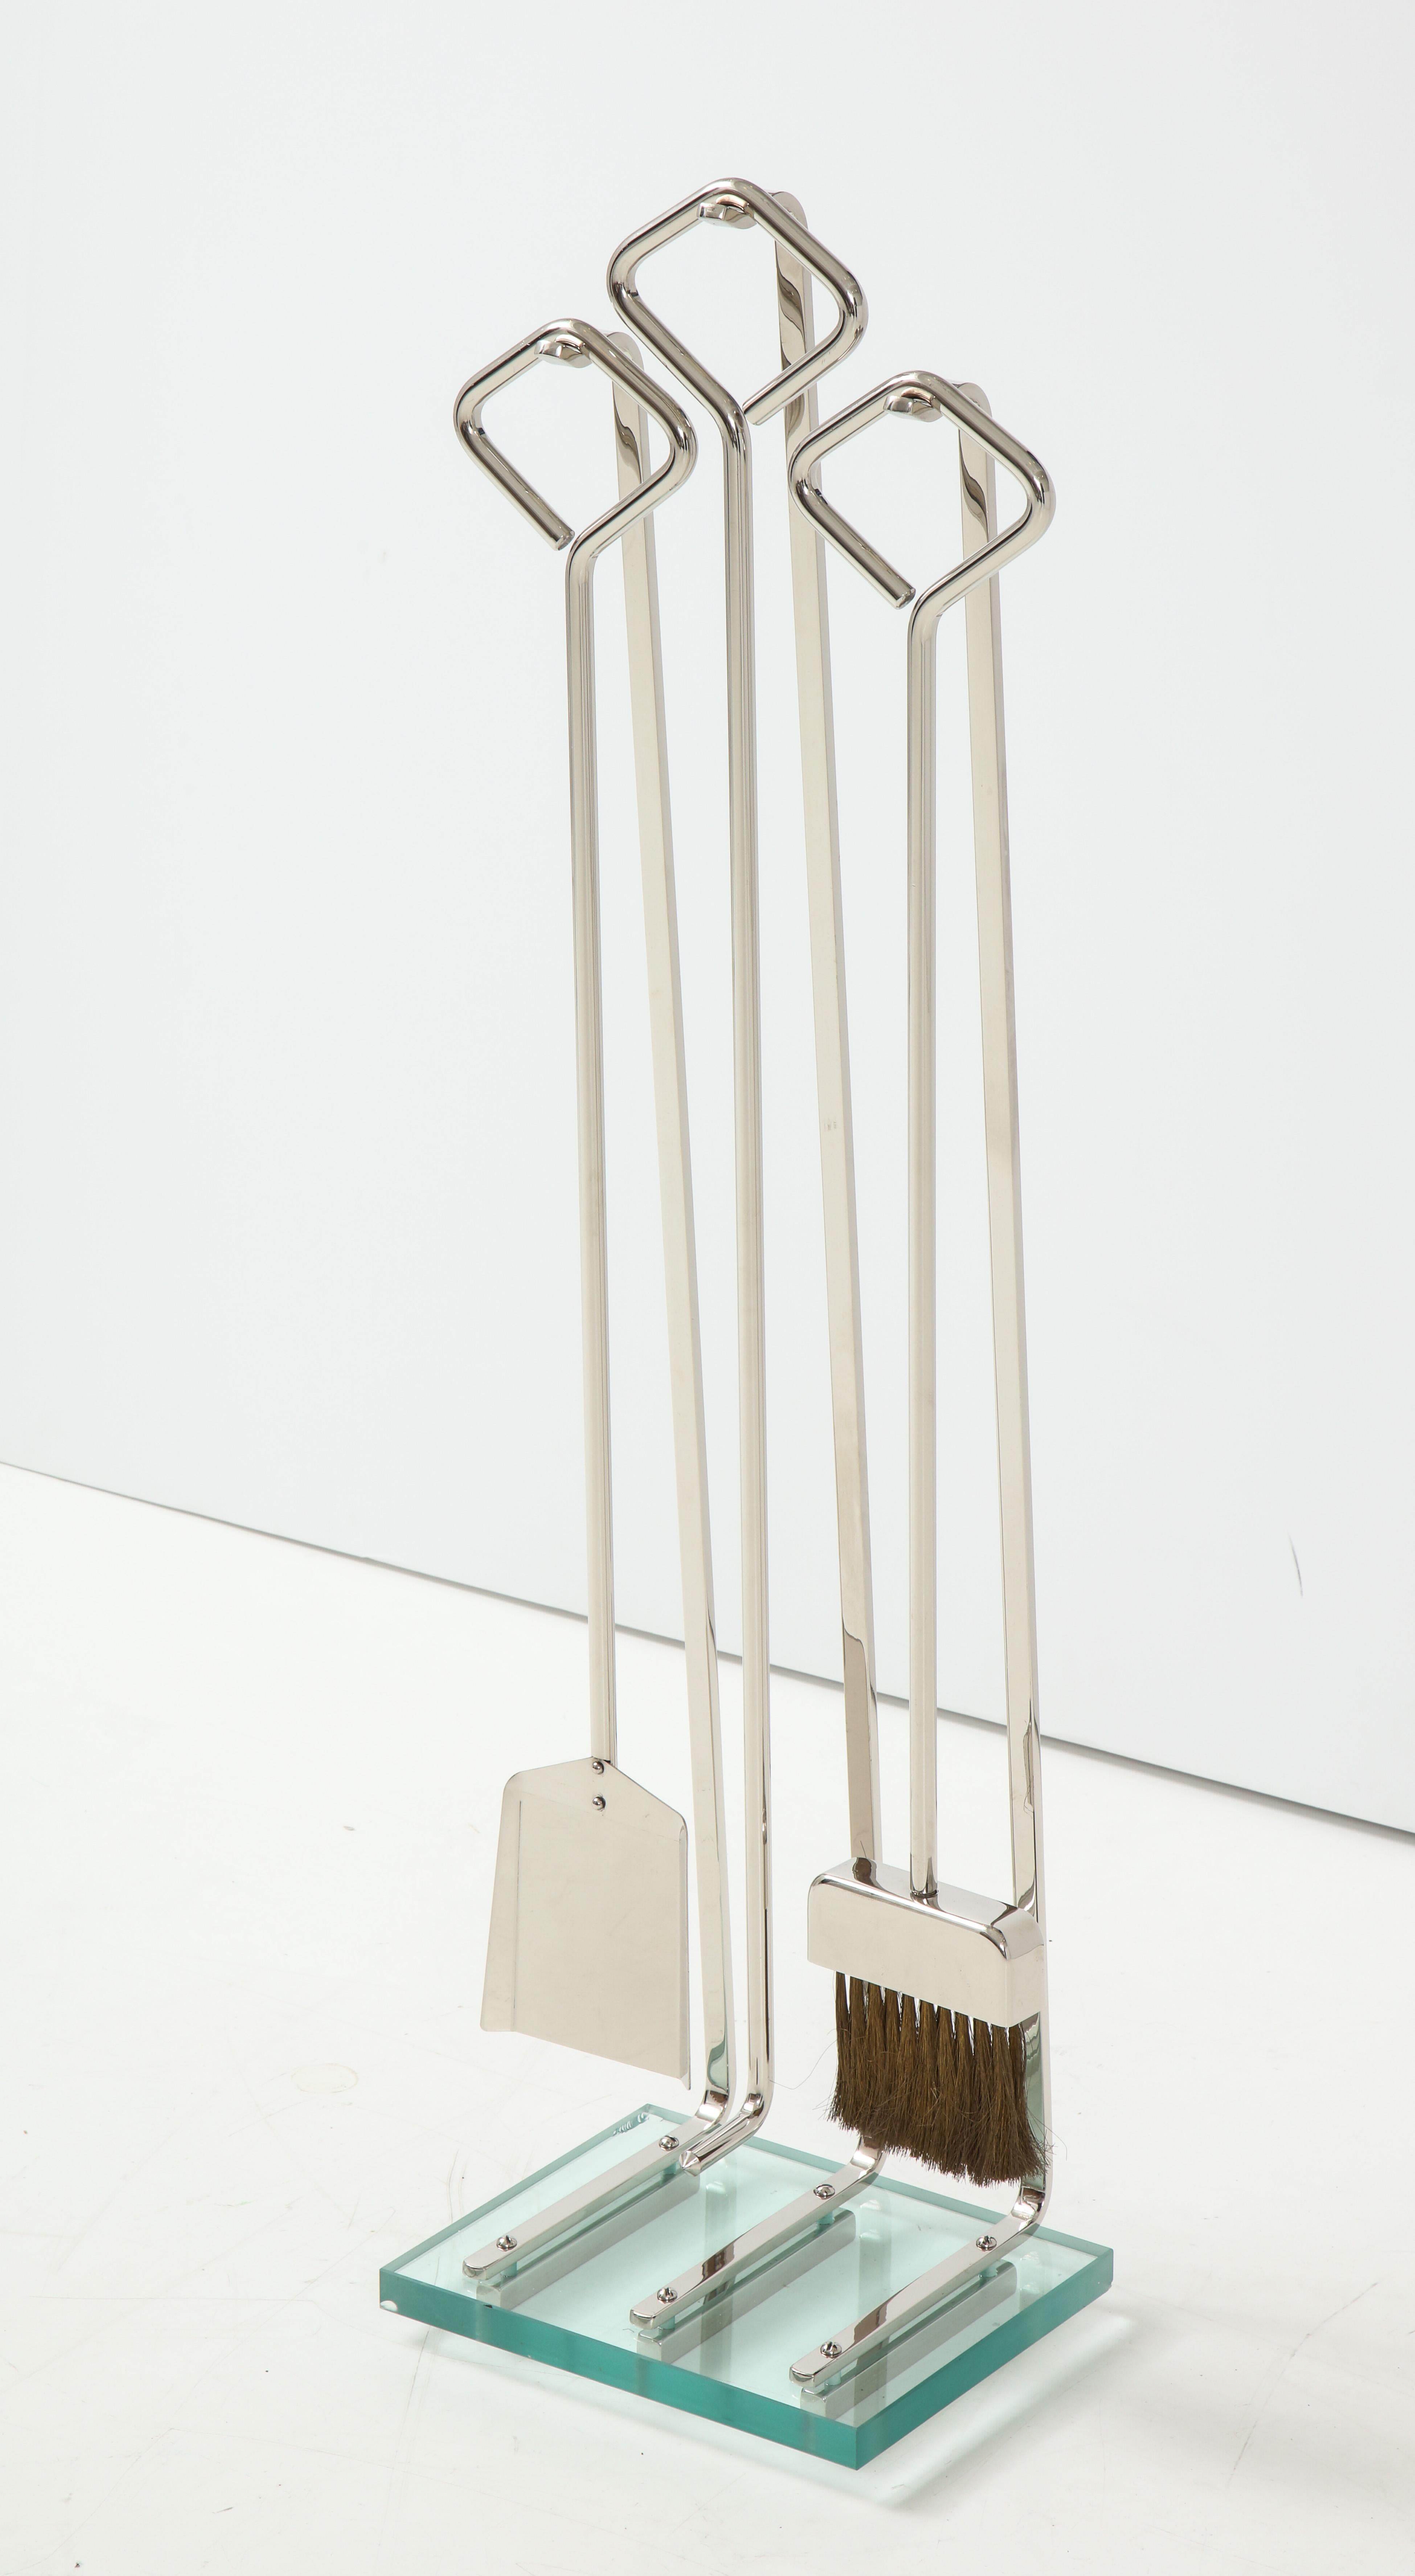 Modernist set of polished nickel fire tools in polished nickel on a glass base.
On display at 200 Lexington Avenue, 10th floor.